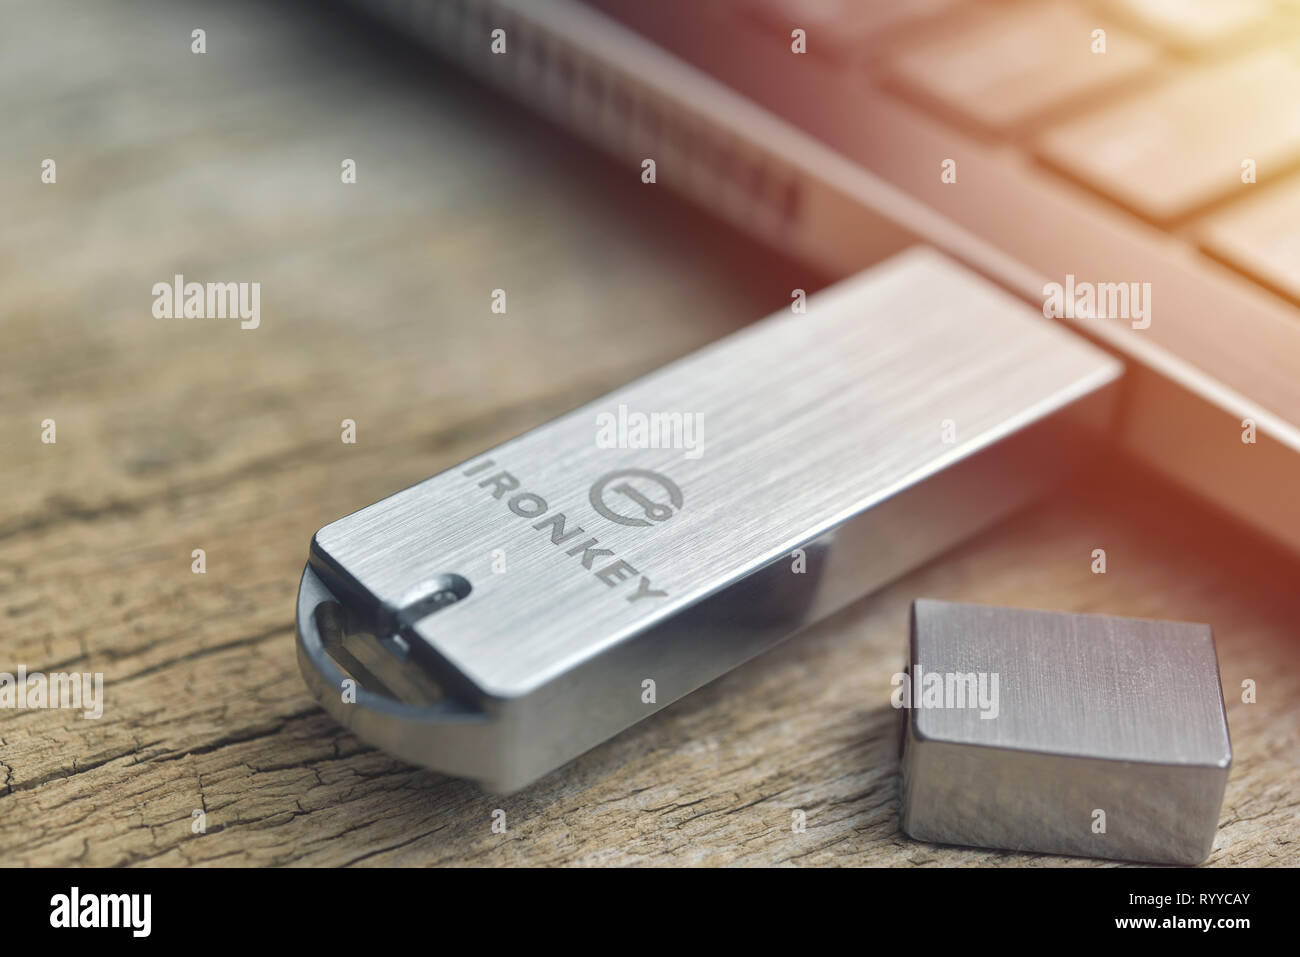 Galati, Romania - March 15, 2019: Close up of Kingston Ironkey ultra secure USB flash drive connected to laptop on wood desk Stock Photo